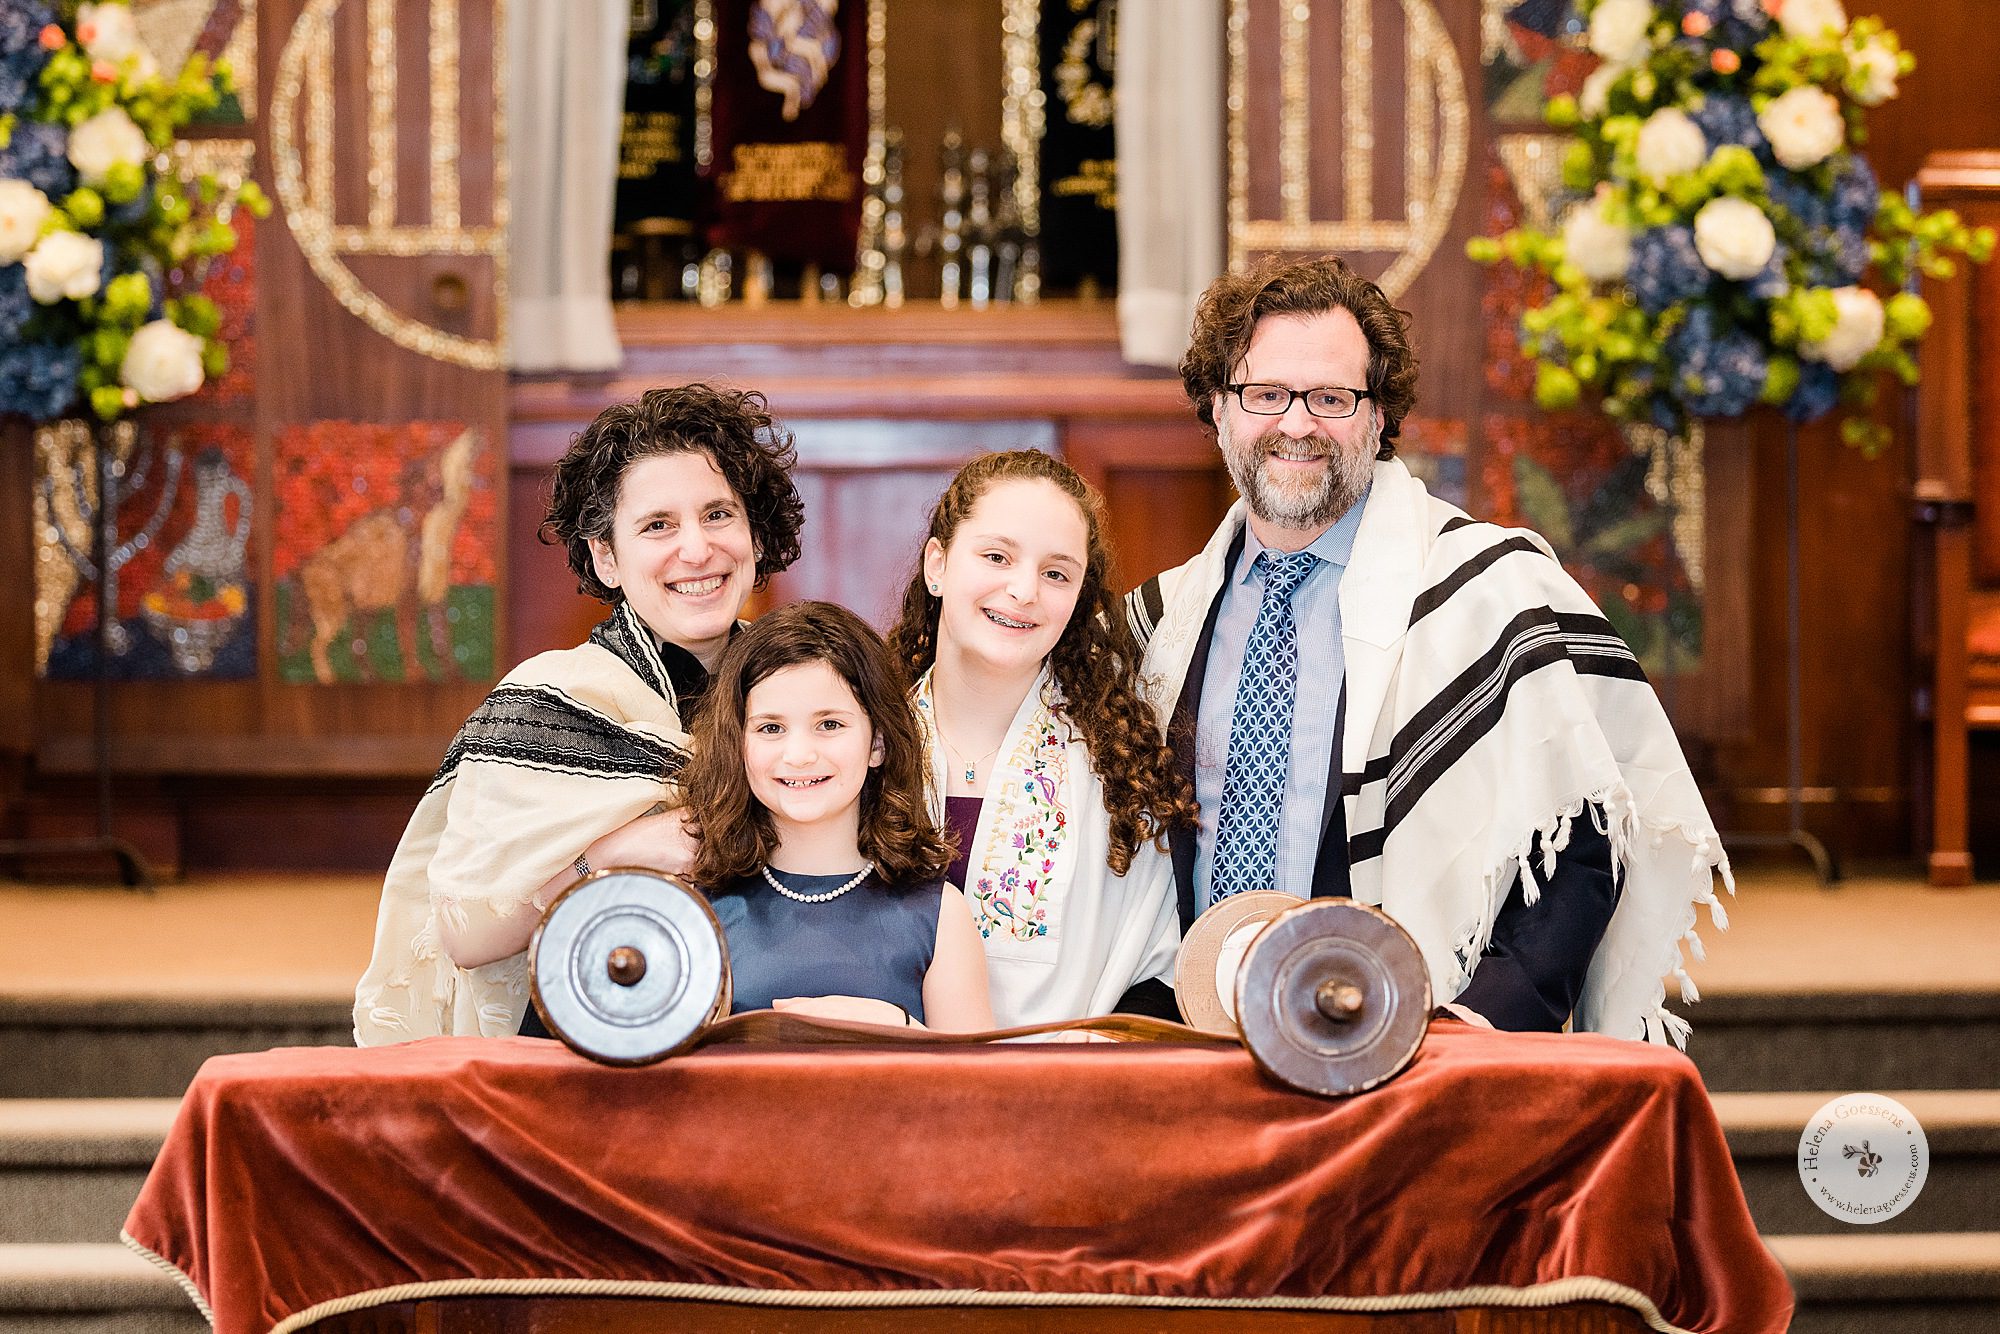 Bat Mitzvah celebration in Brookline MA photographed by Helena Goessens Photography